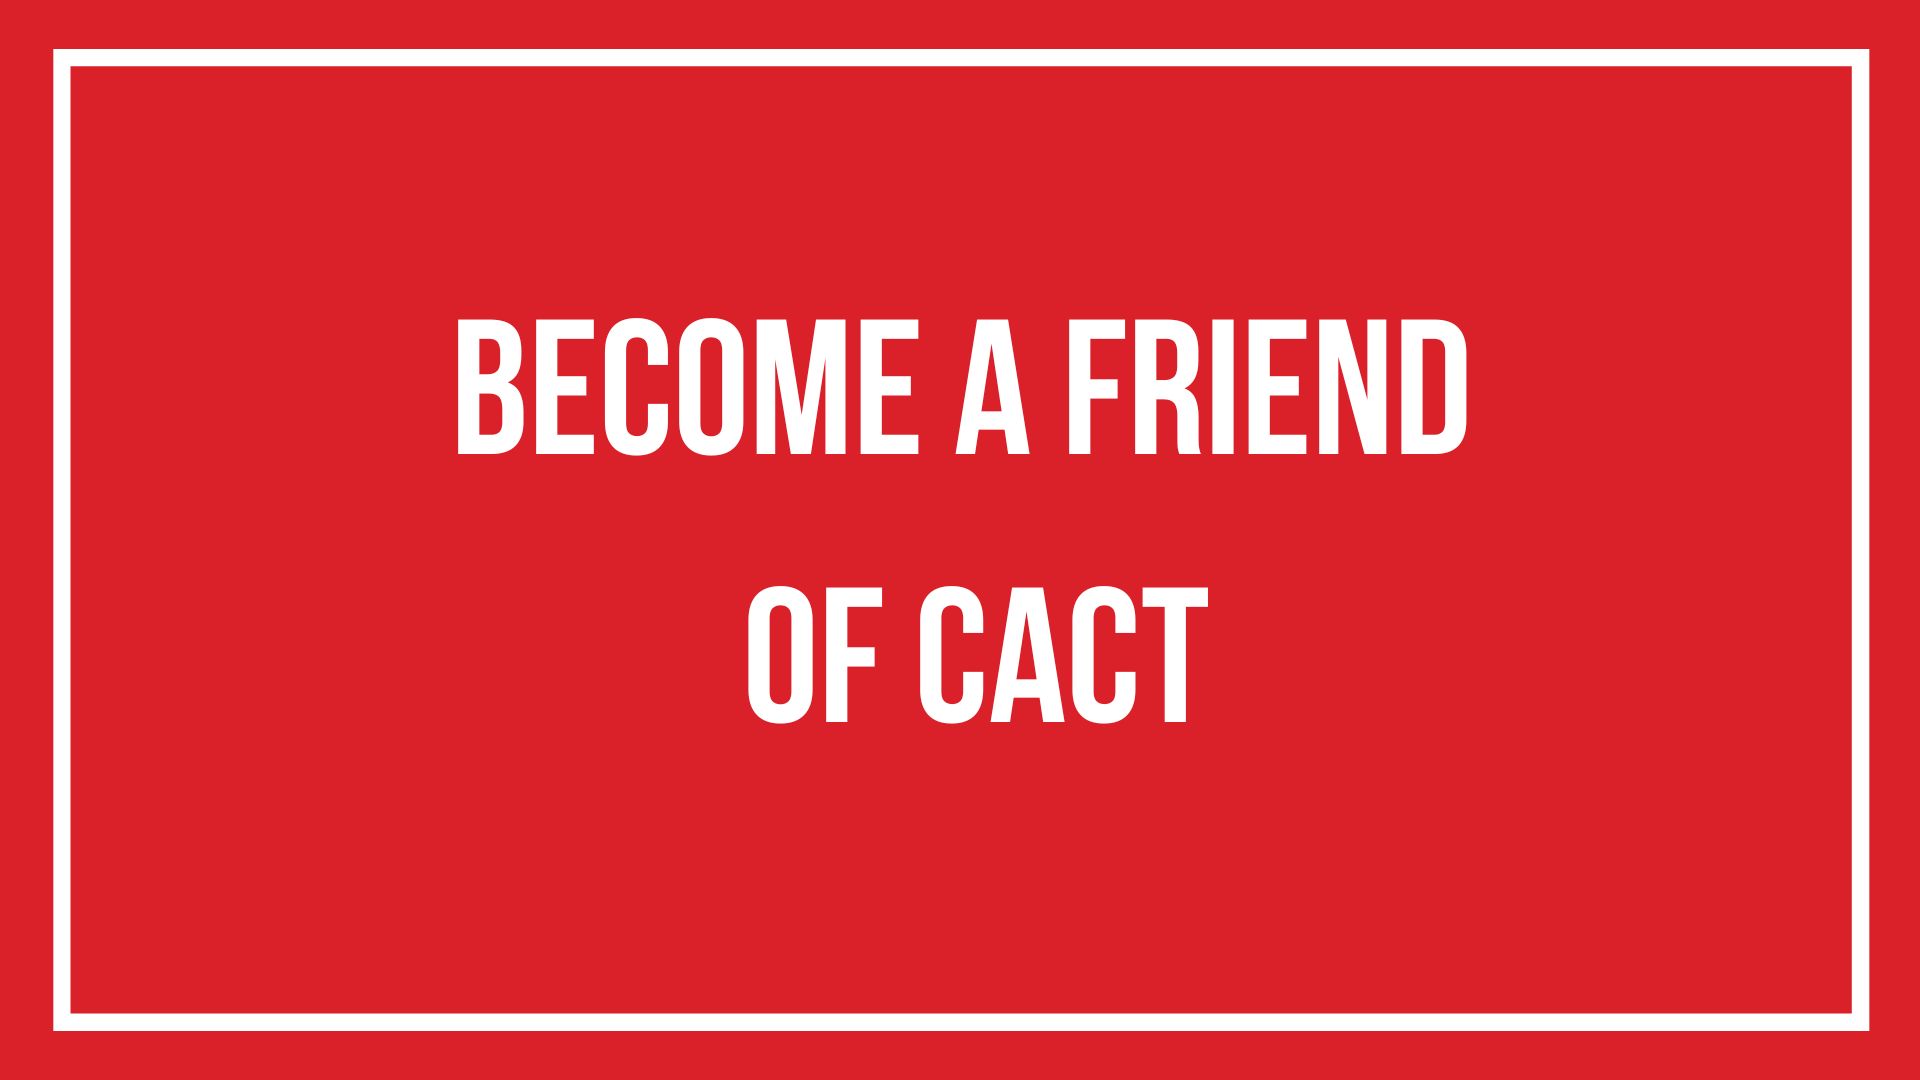 Text design saying 'Become a Friend of CACT'